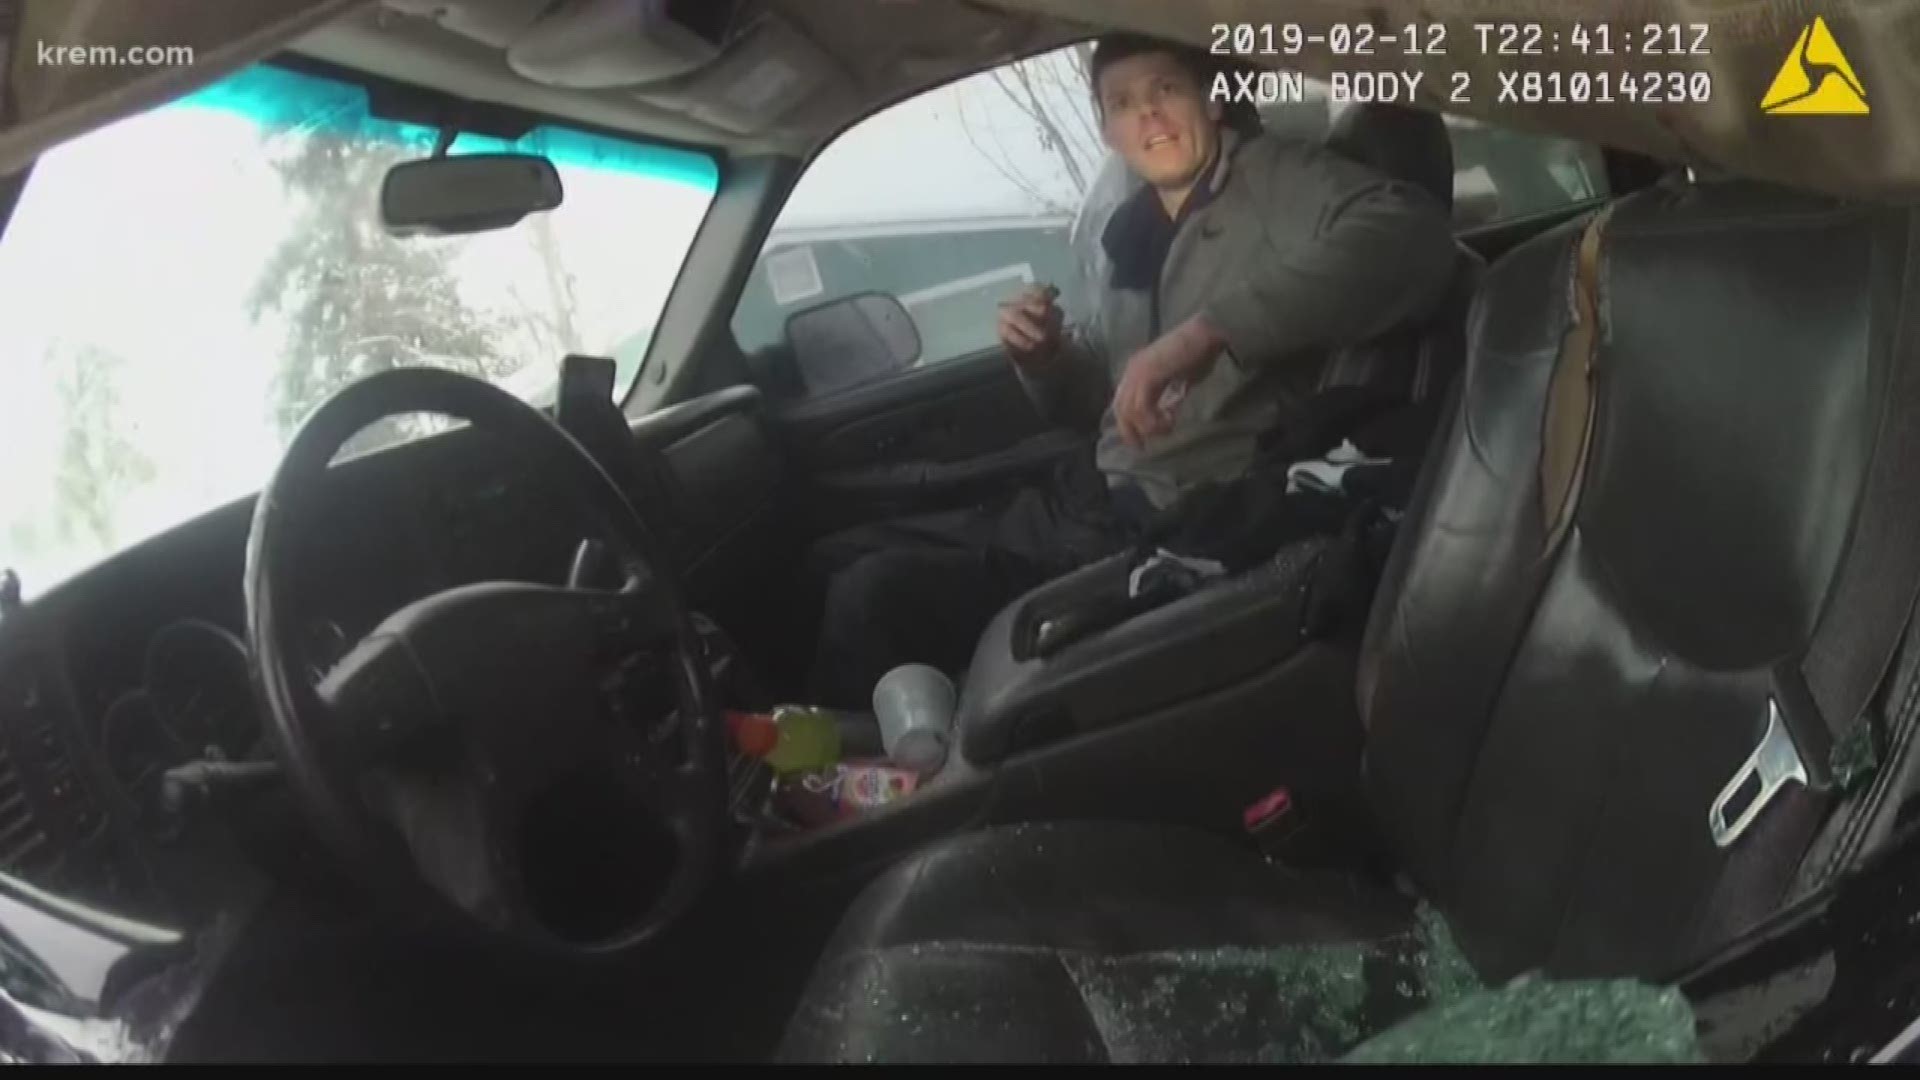 KREM takes a second look at this body camera video Spokane Police released.